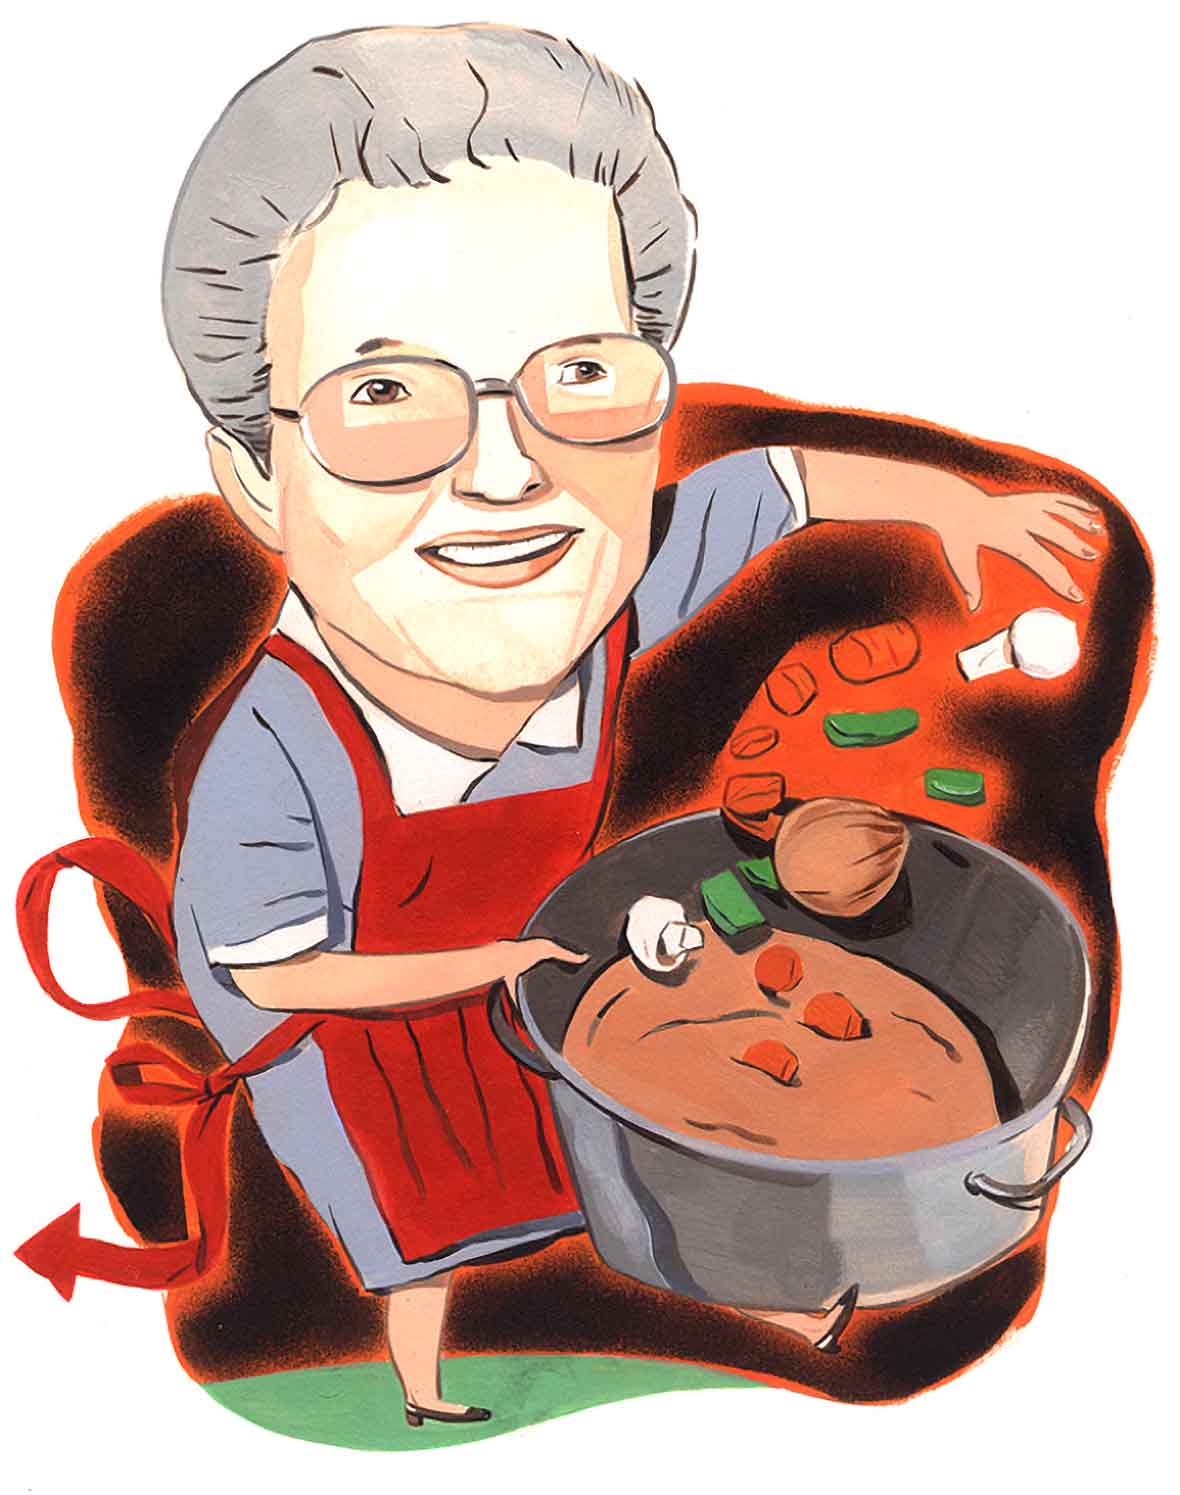 Illustration of a woman in a red apron holding a pot of stew